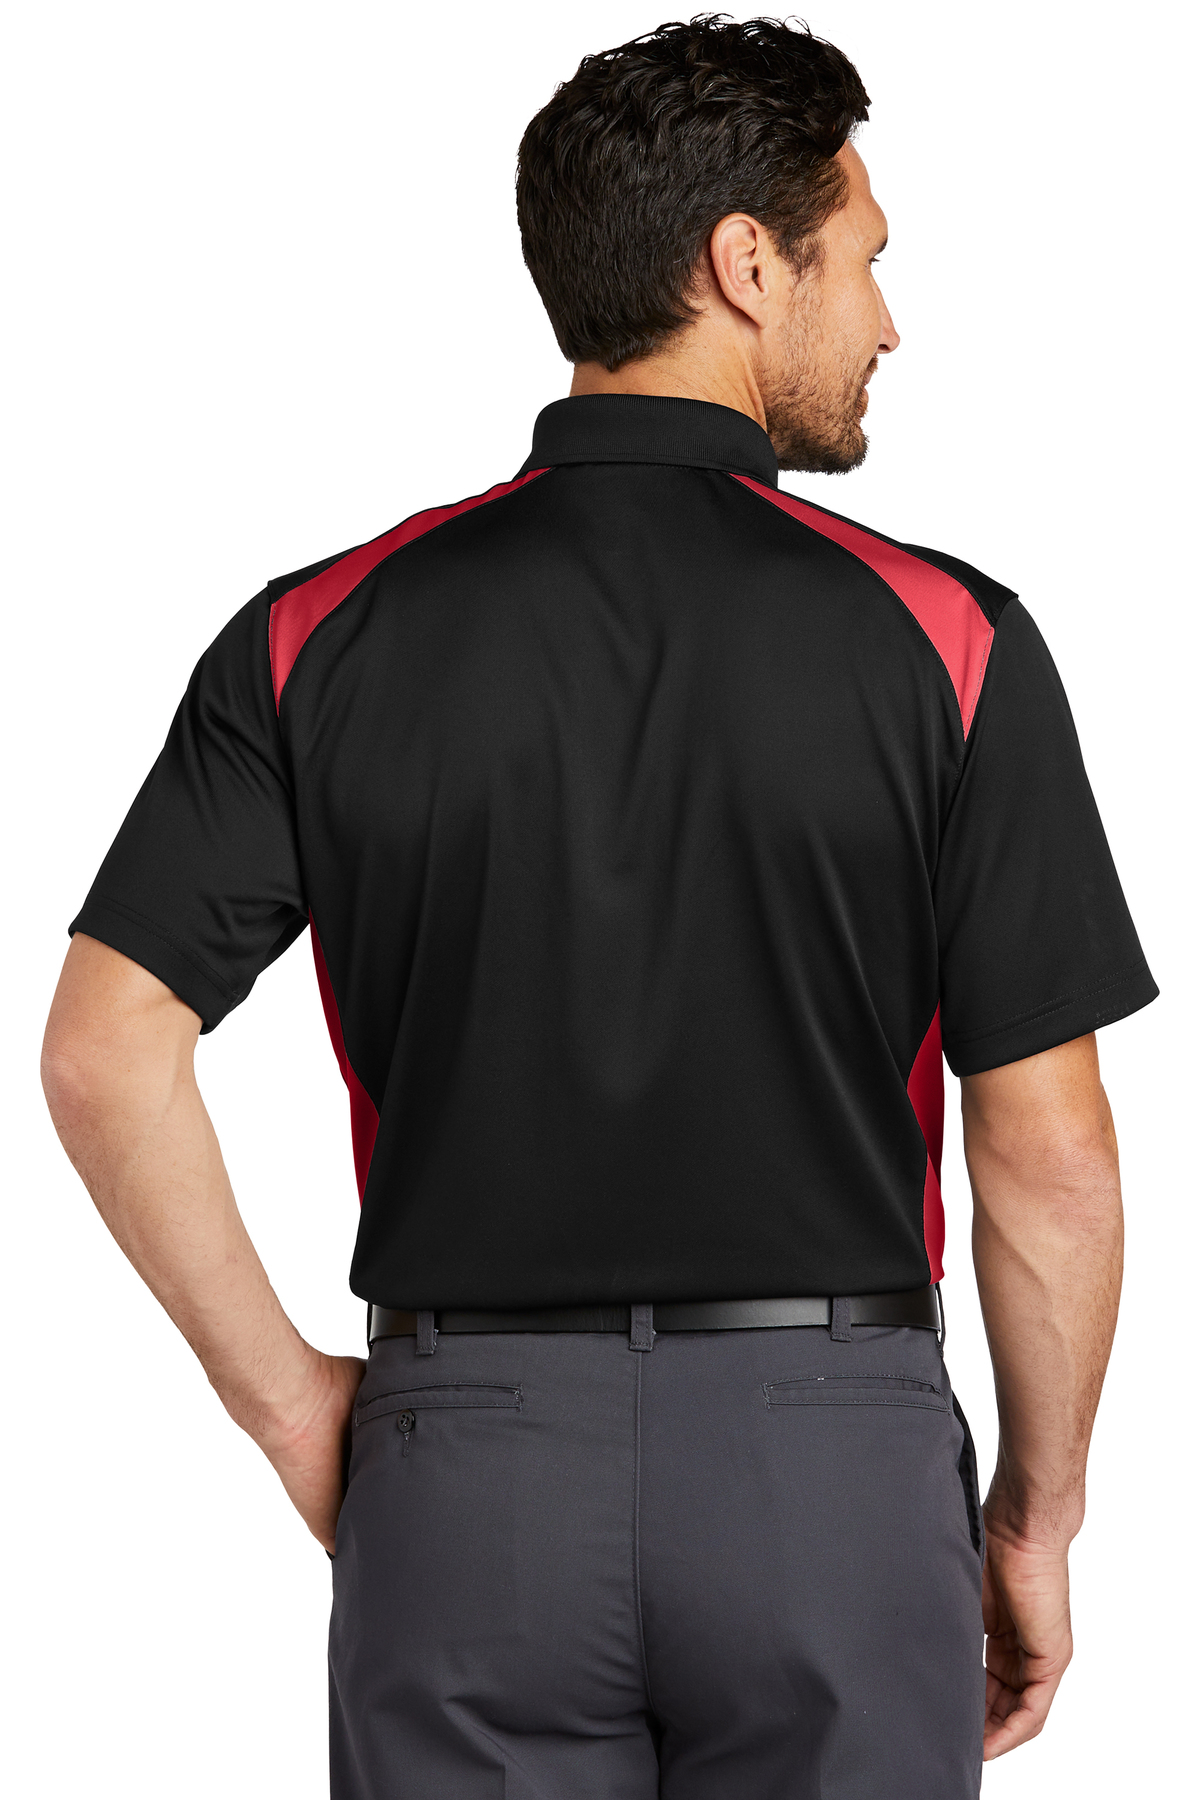 CornerStone Select Snag-Proof Two Way Colorblock Pocket Polo | Product ...